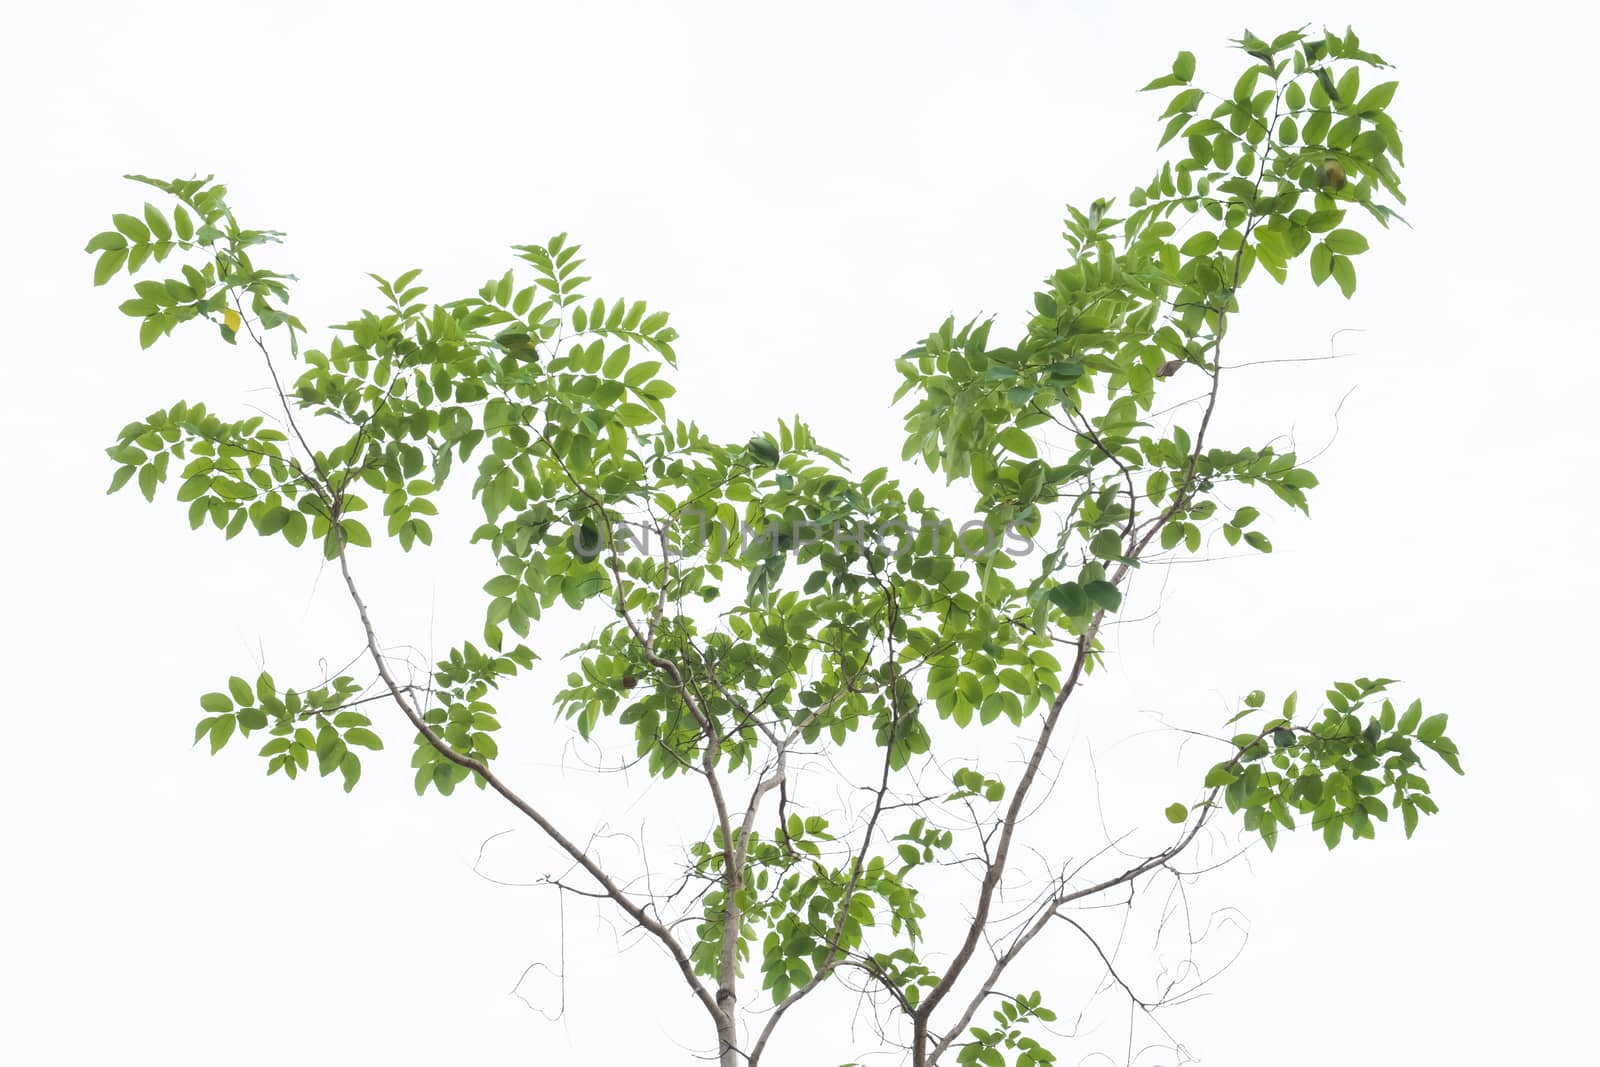 tree on white background, green leafs.